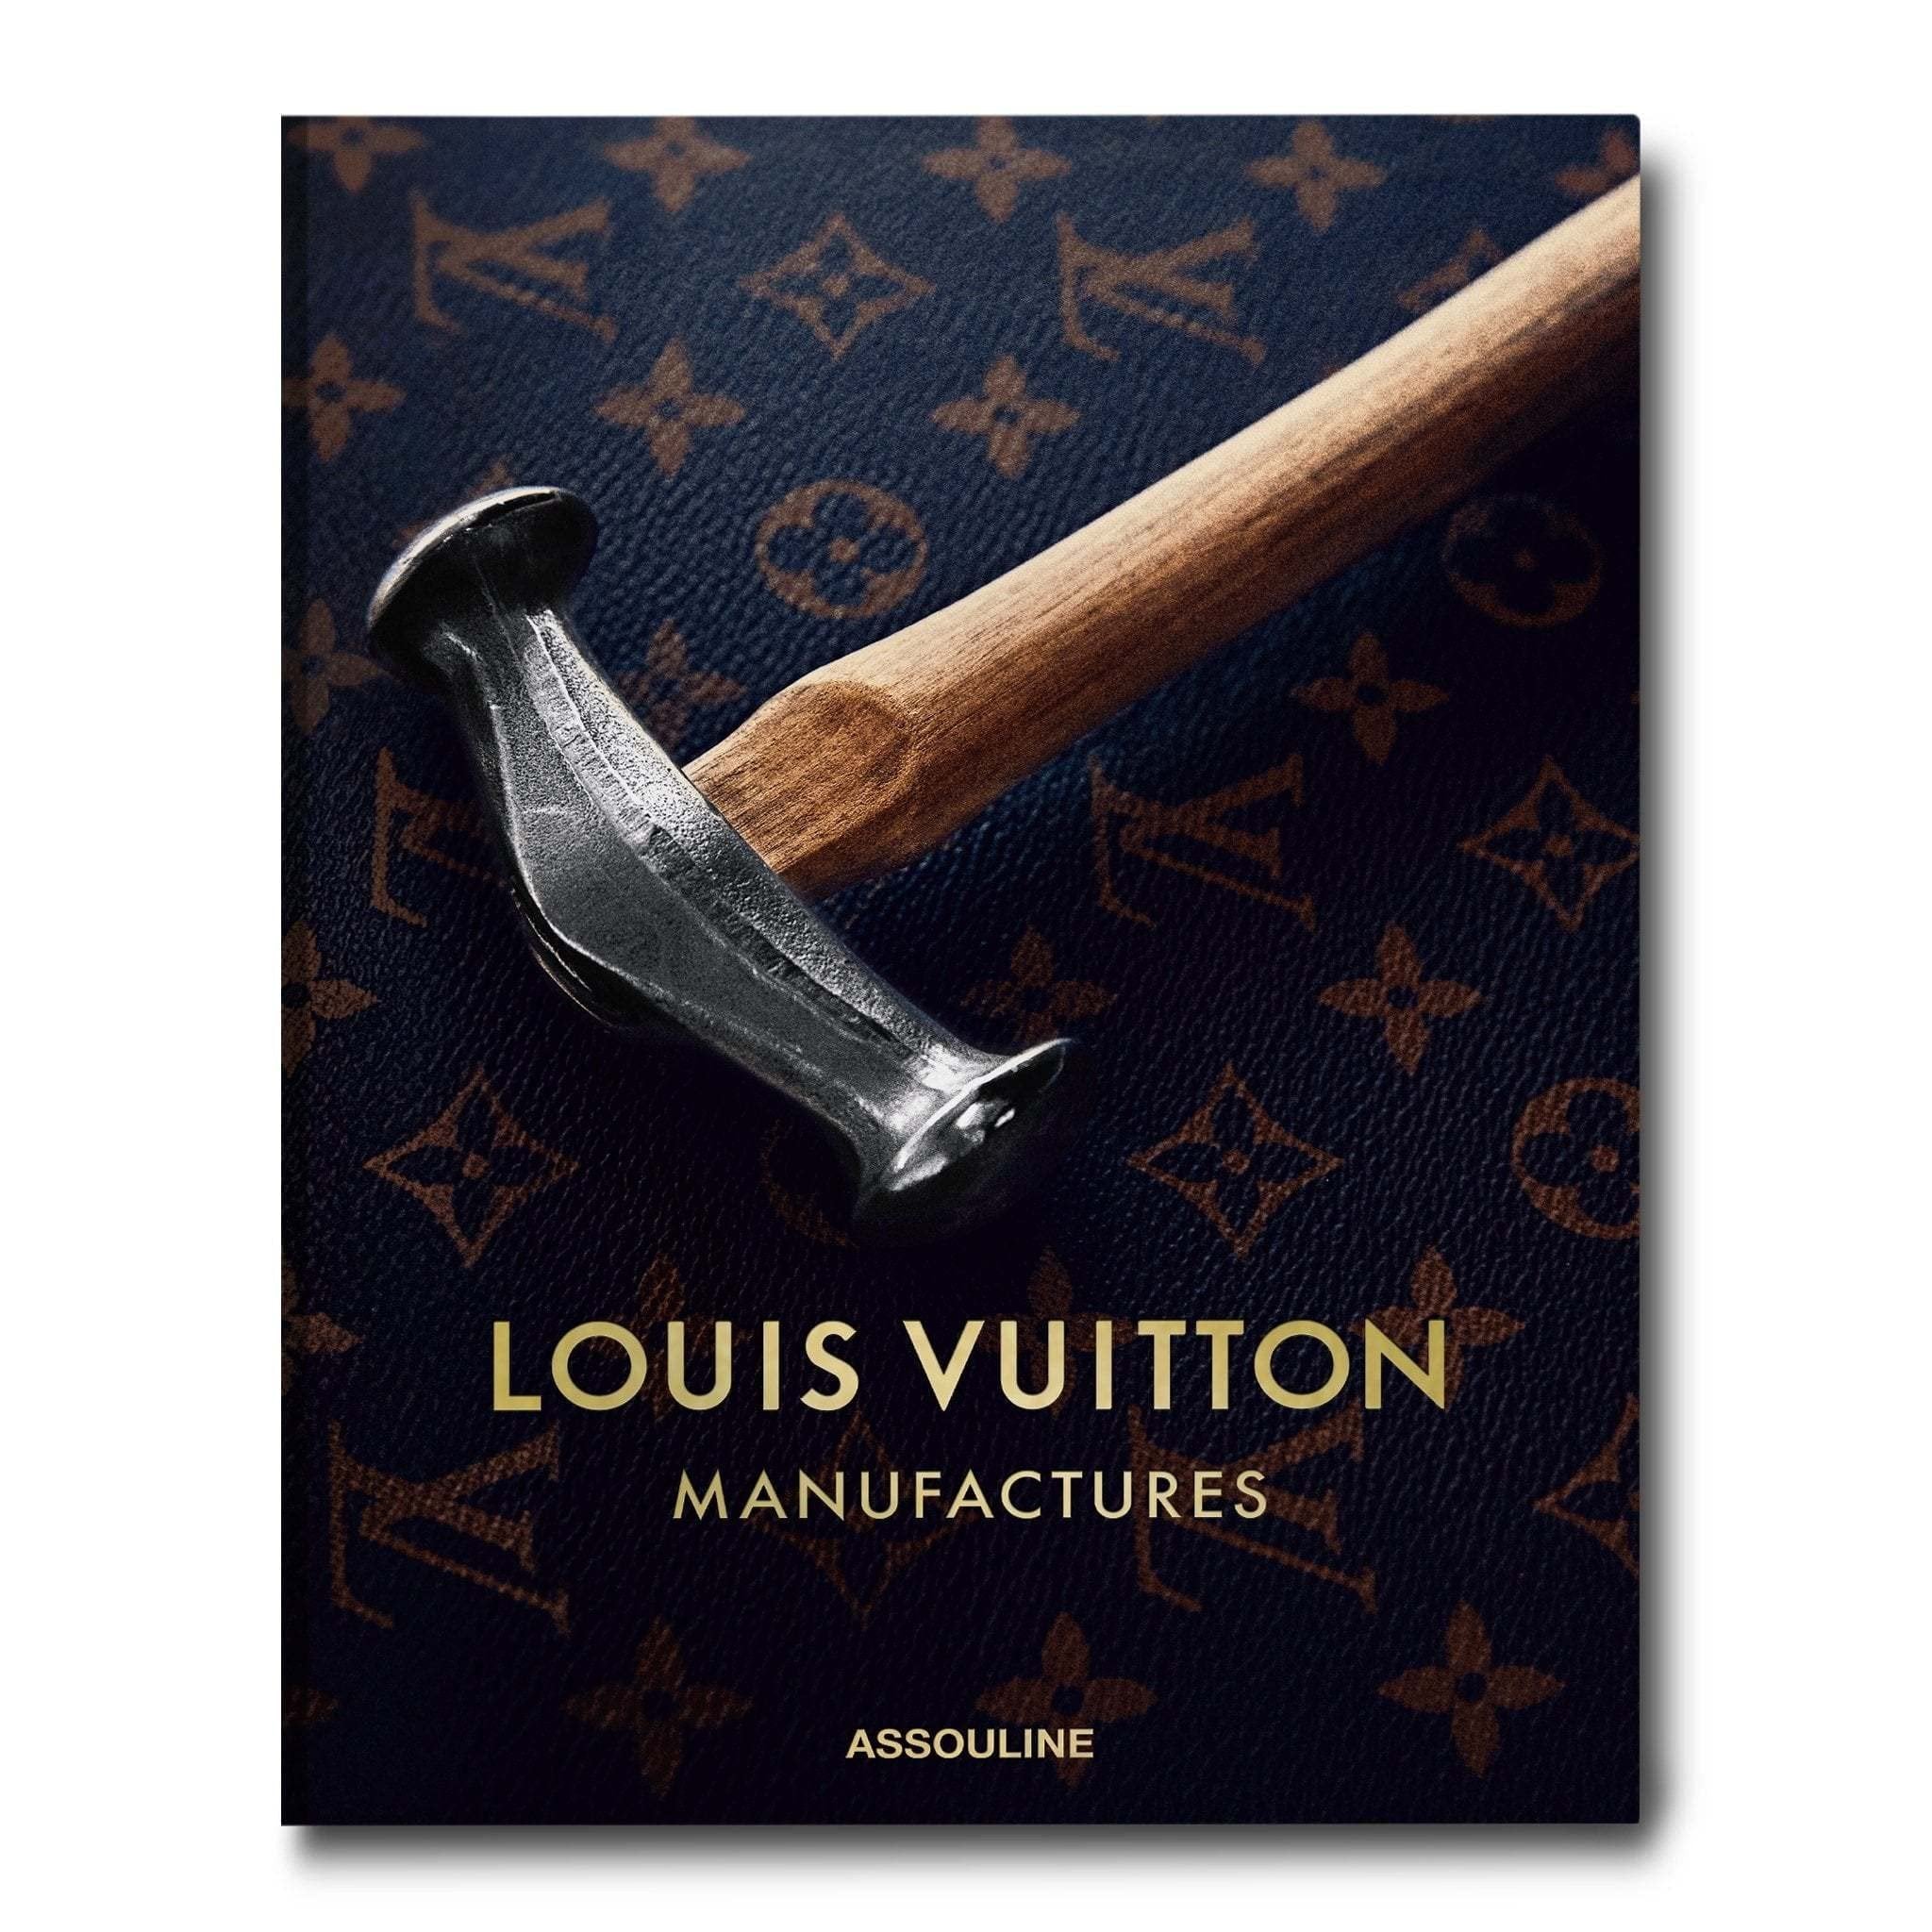 Louis Vuitton Skin (Tokyo cover): Architecture of Luxury